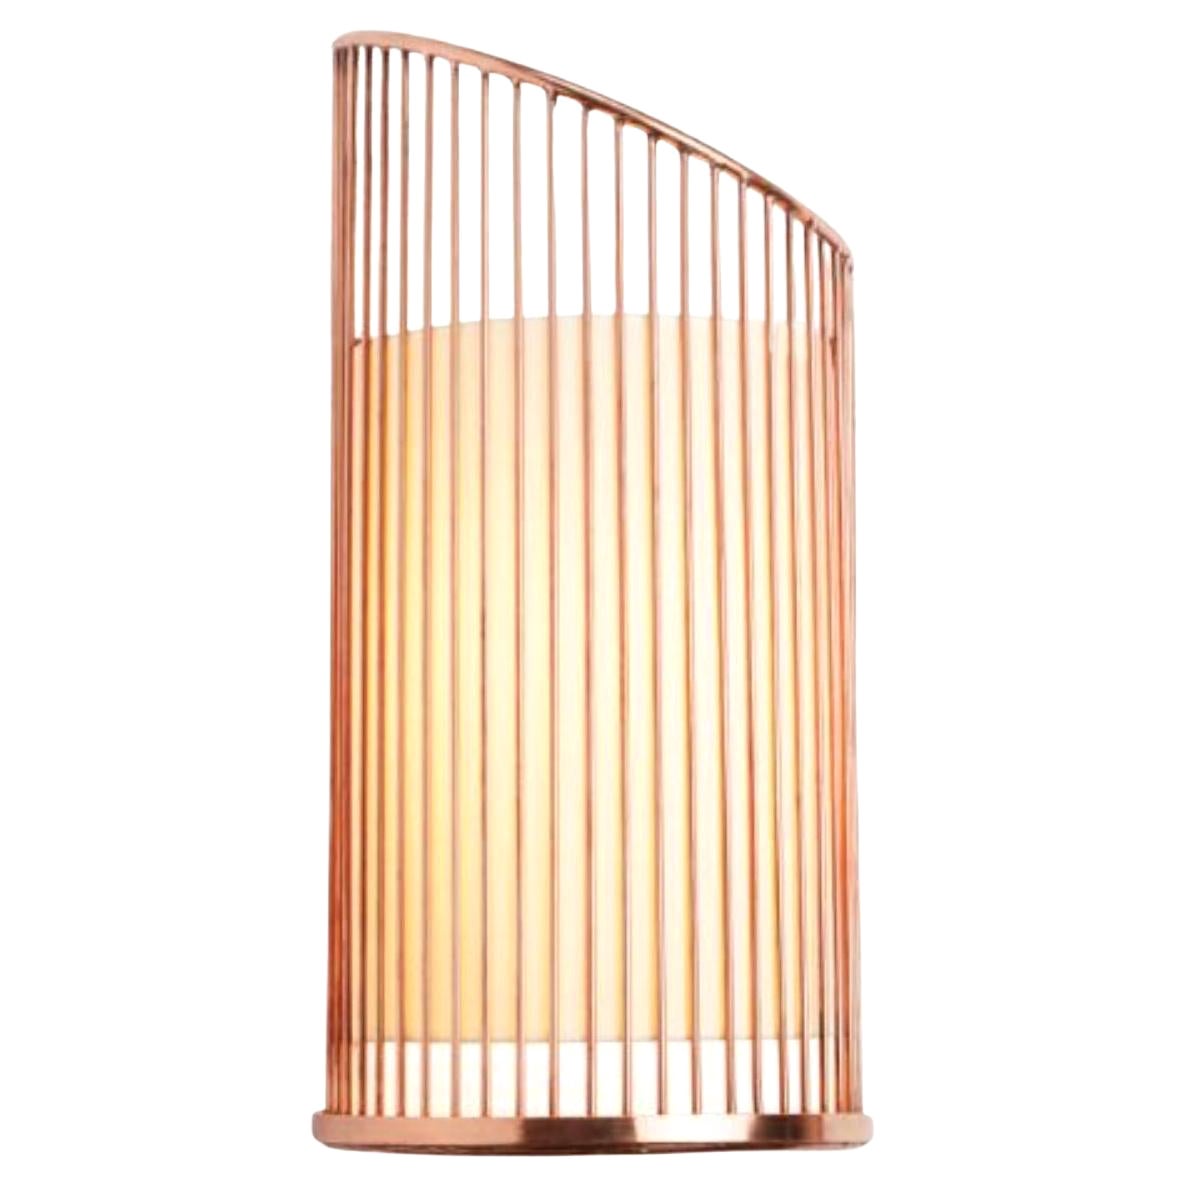 Copper New Spider Wall Lamp with Copper Ring by Dooq For Sale